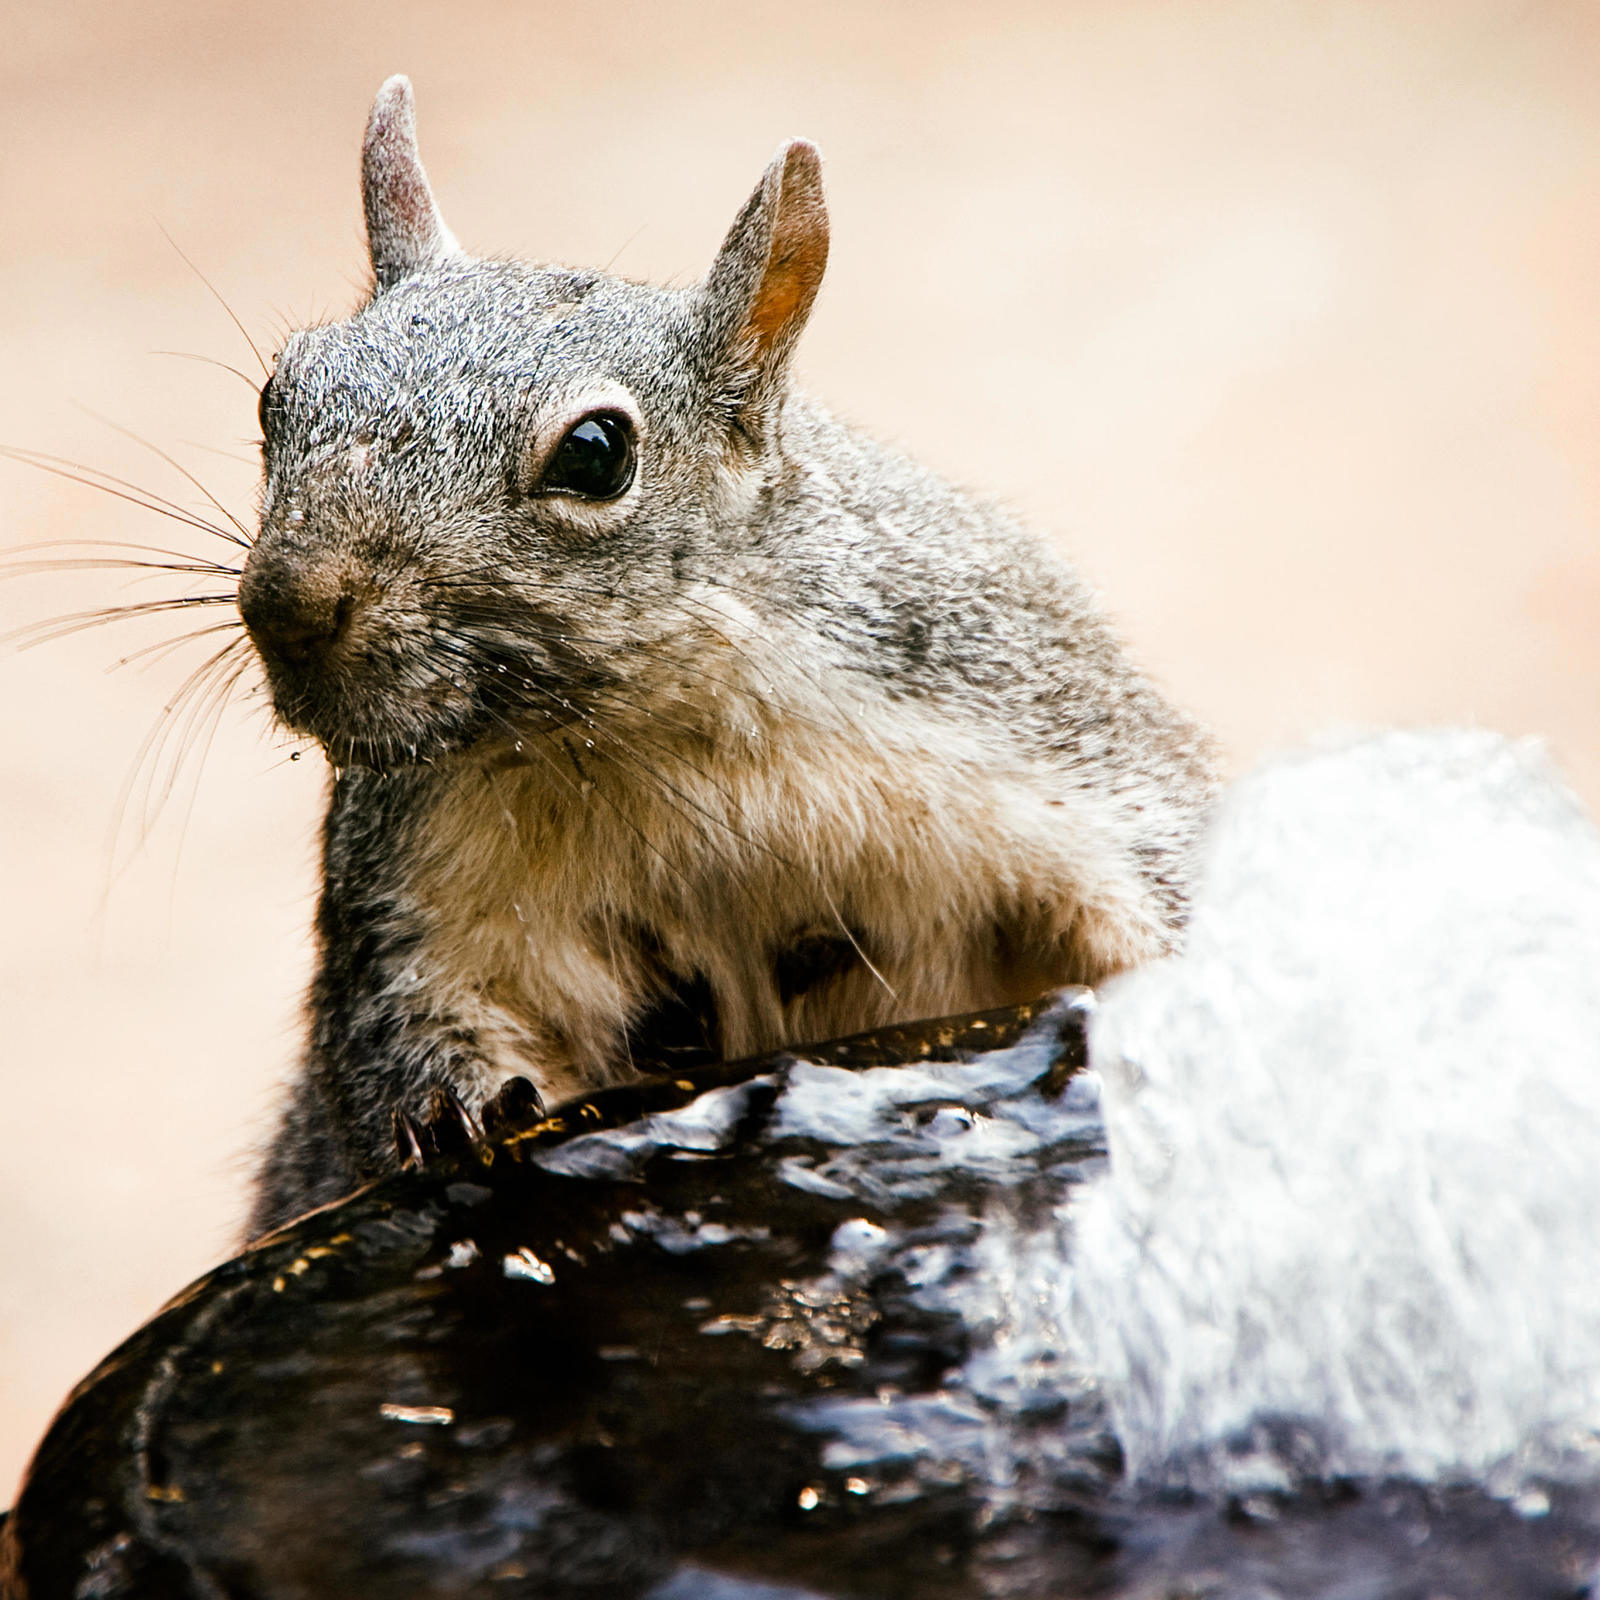 These squirrels are latest species to become endangered in Washington state